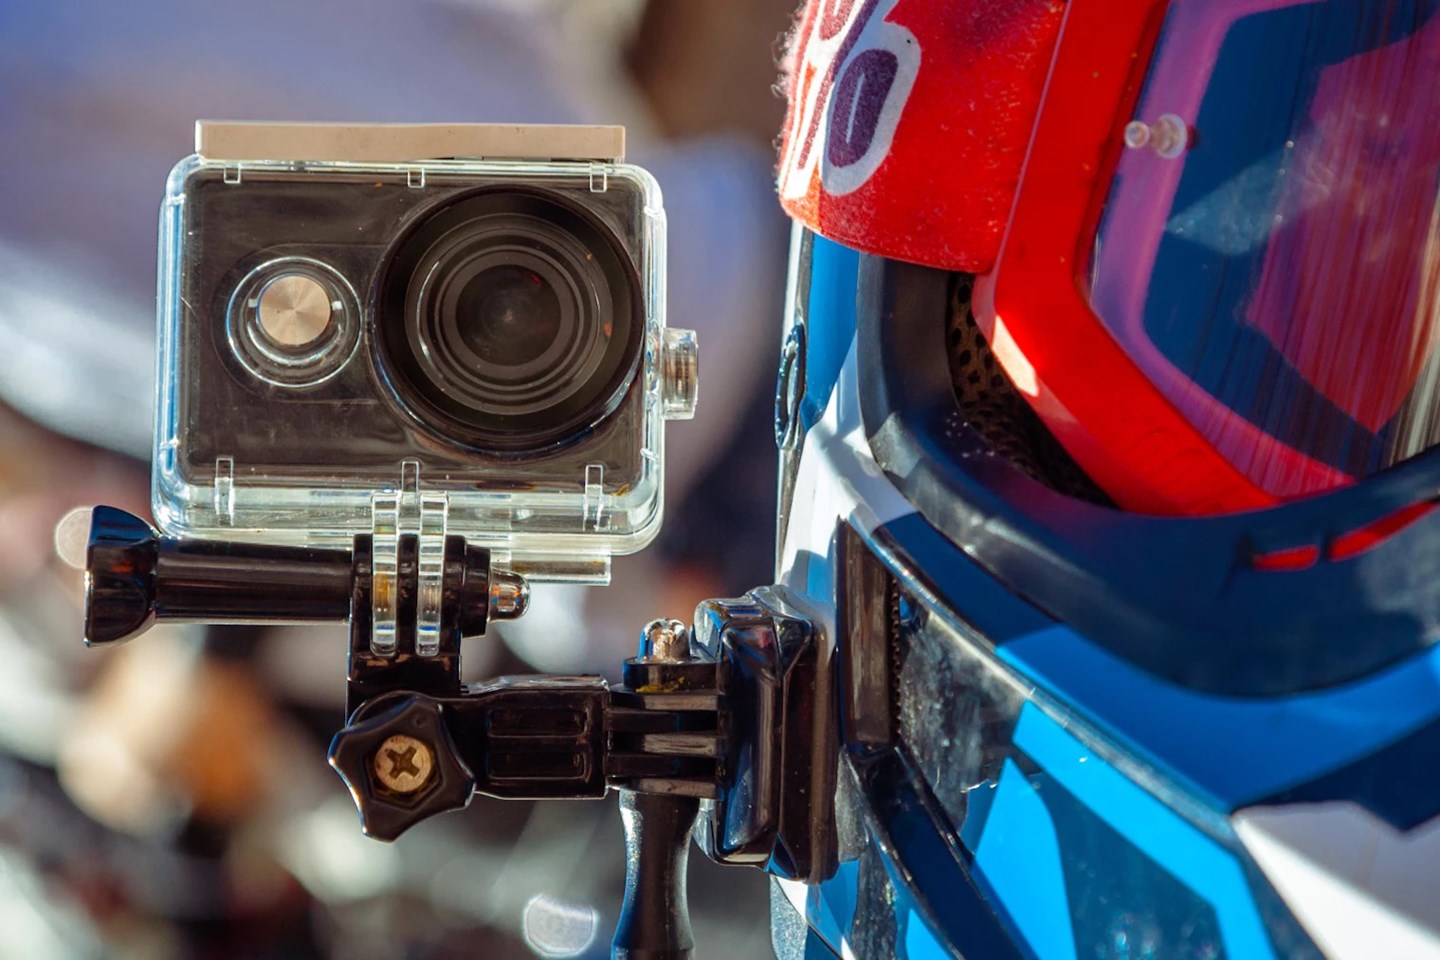 4 Best Action Cameras for Motorcycle